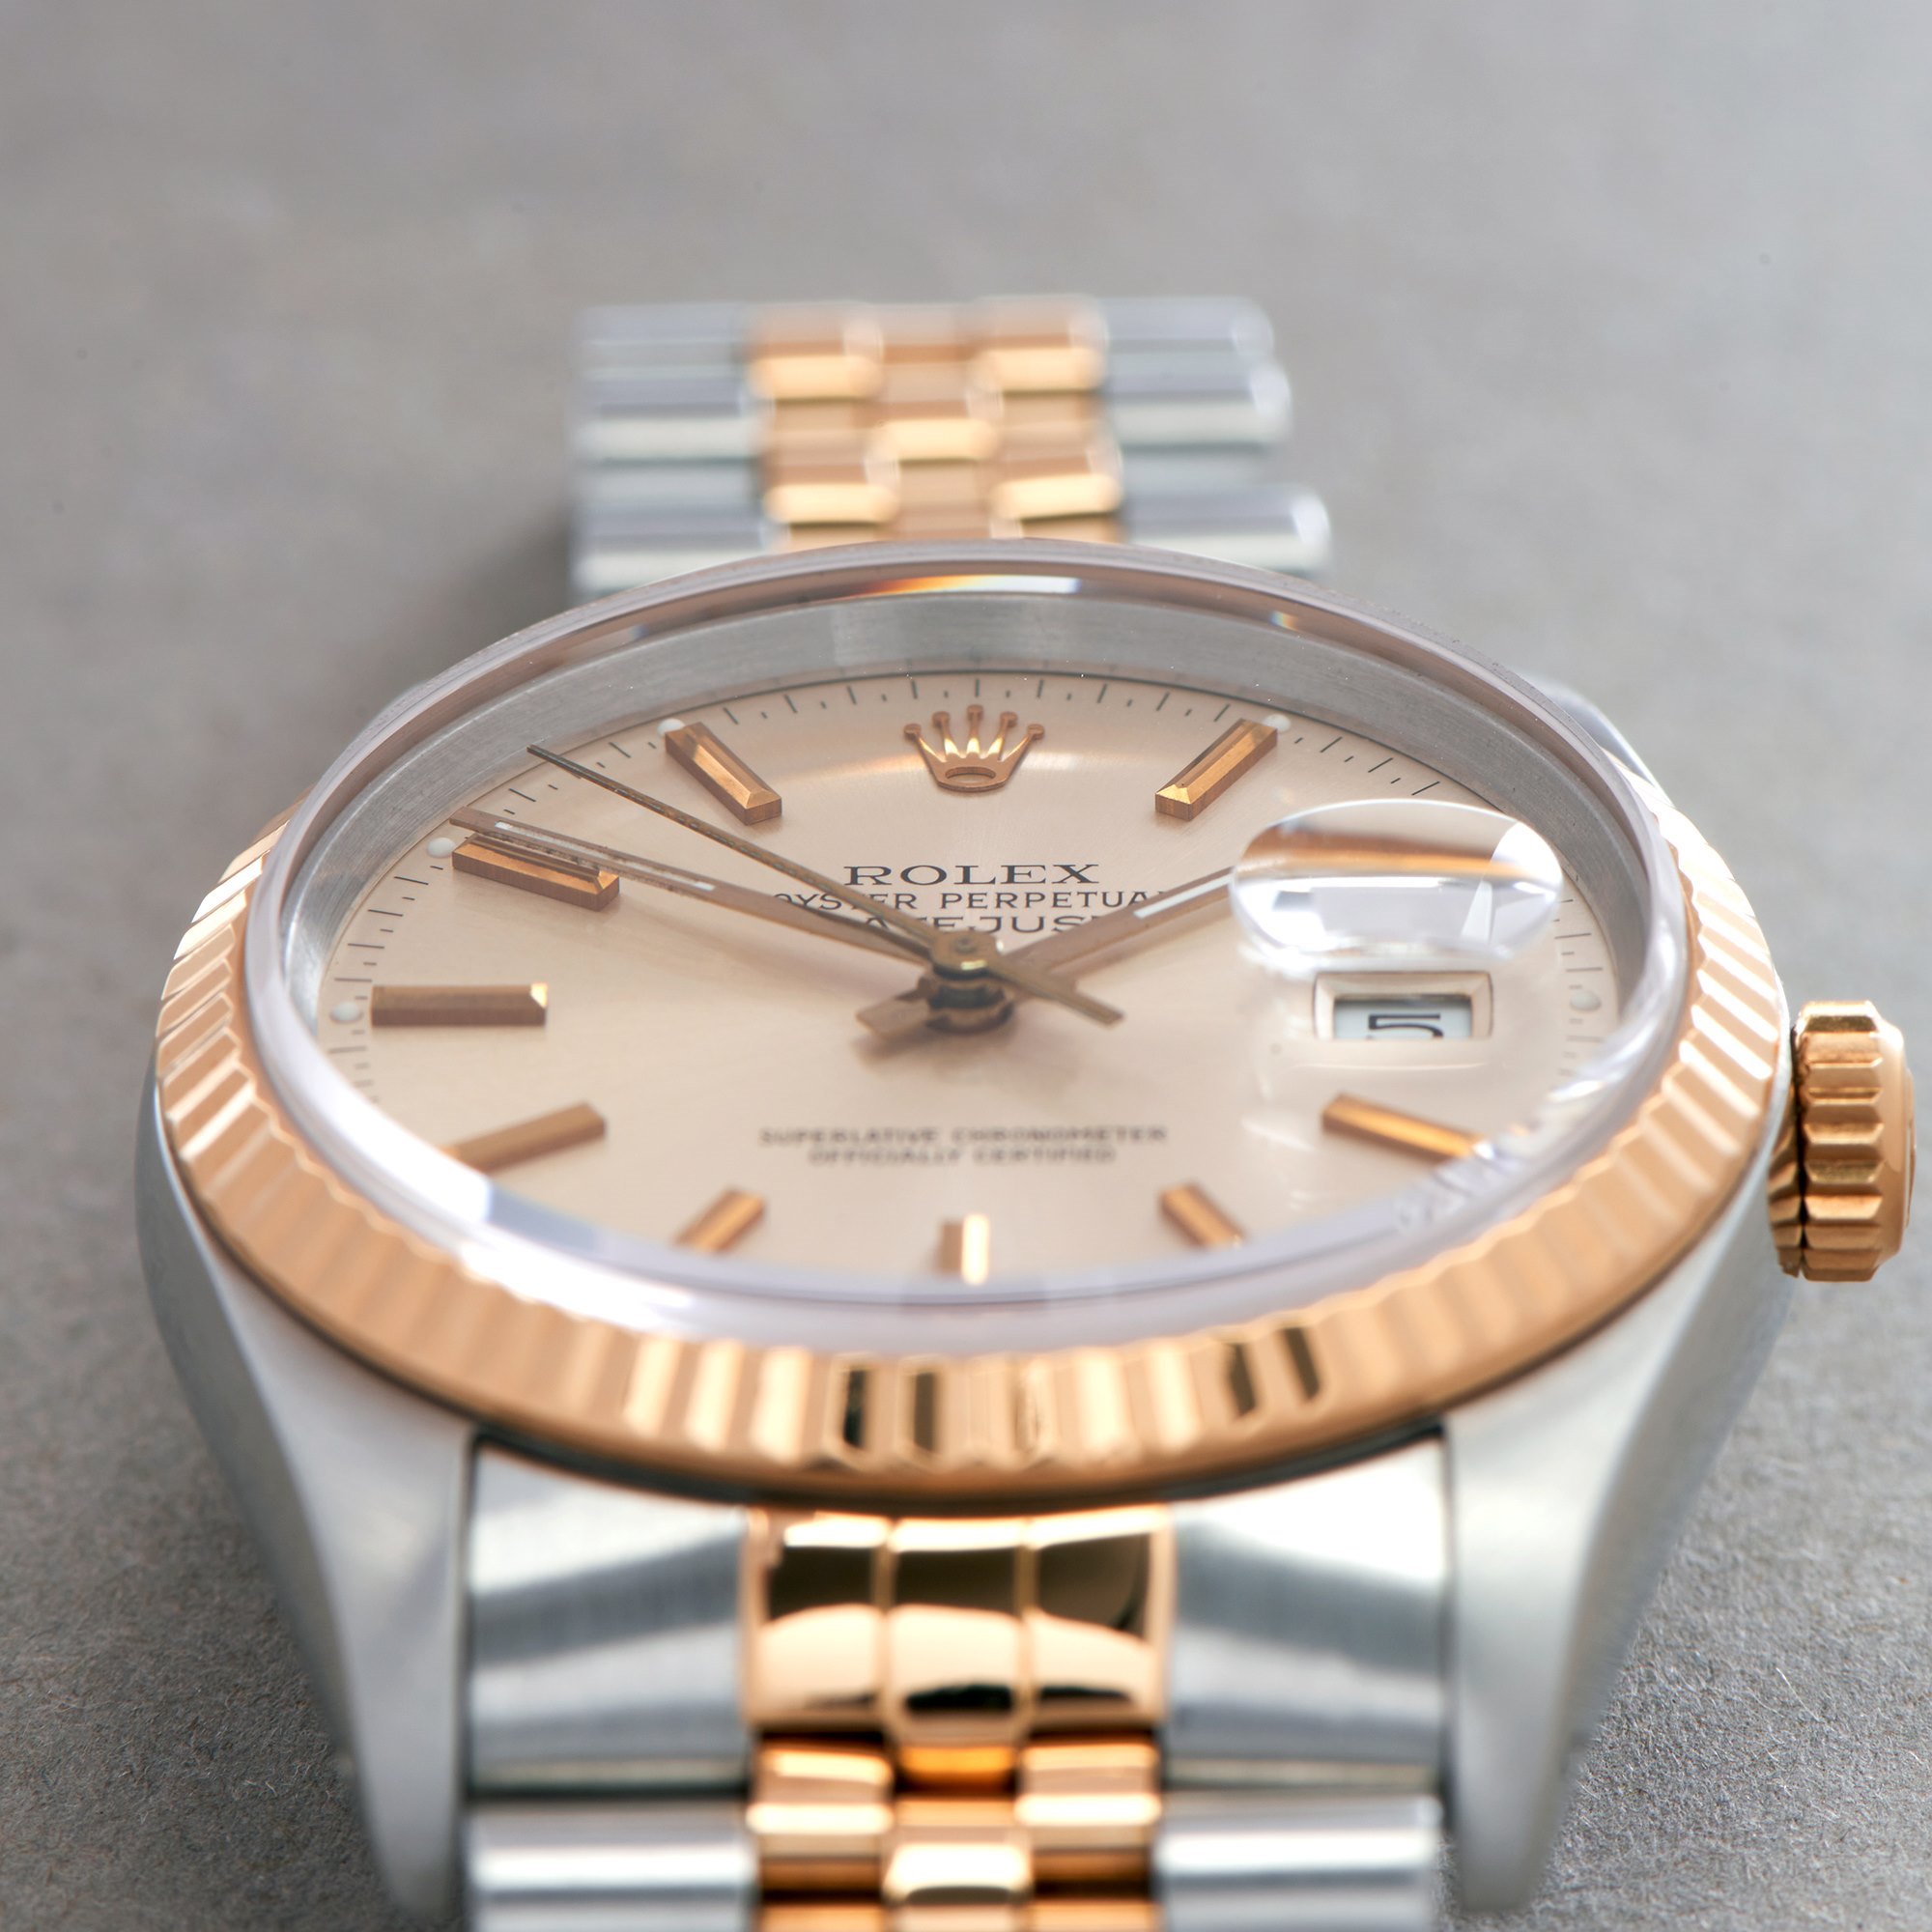 Rolex Datejust 36 18K Yellow Gold & Stainless Steel 16233